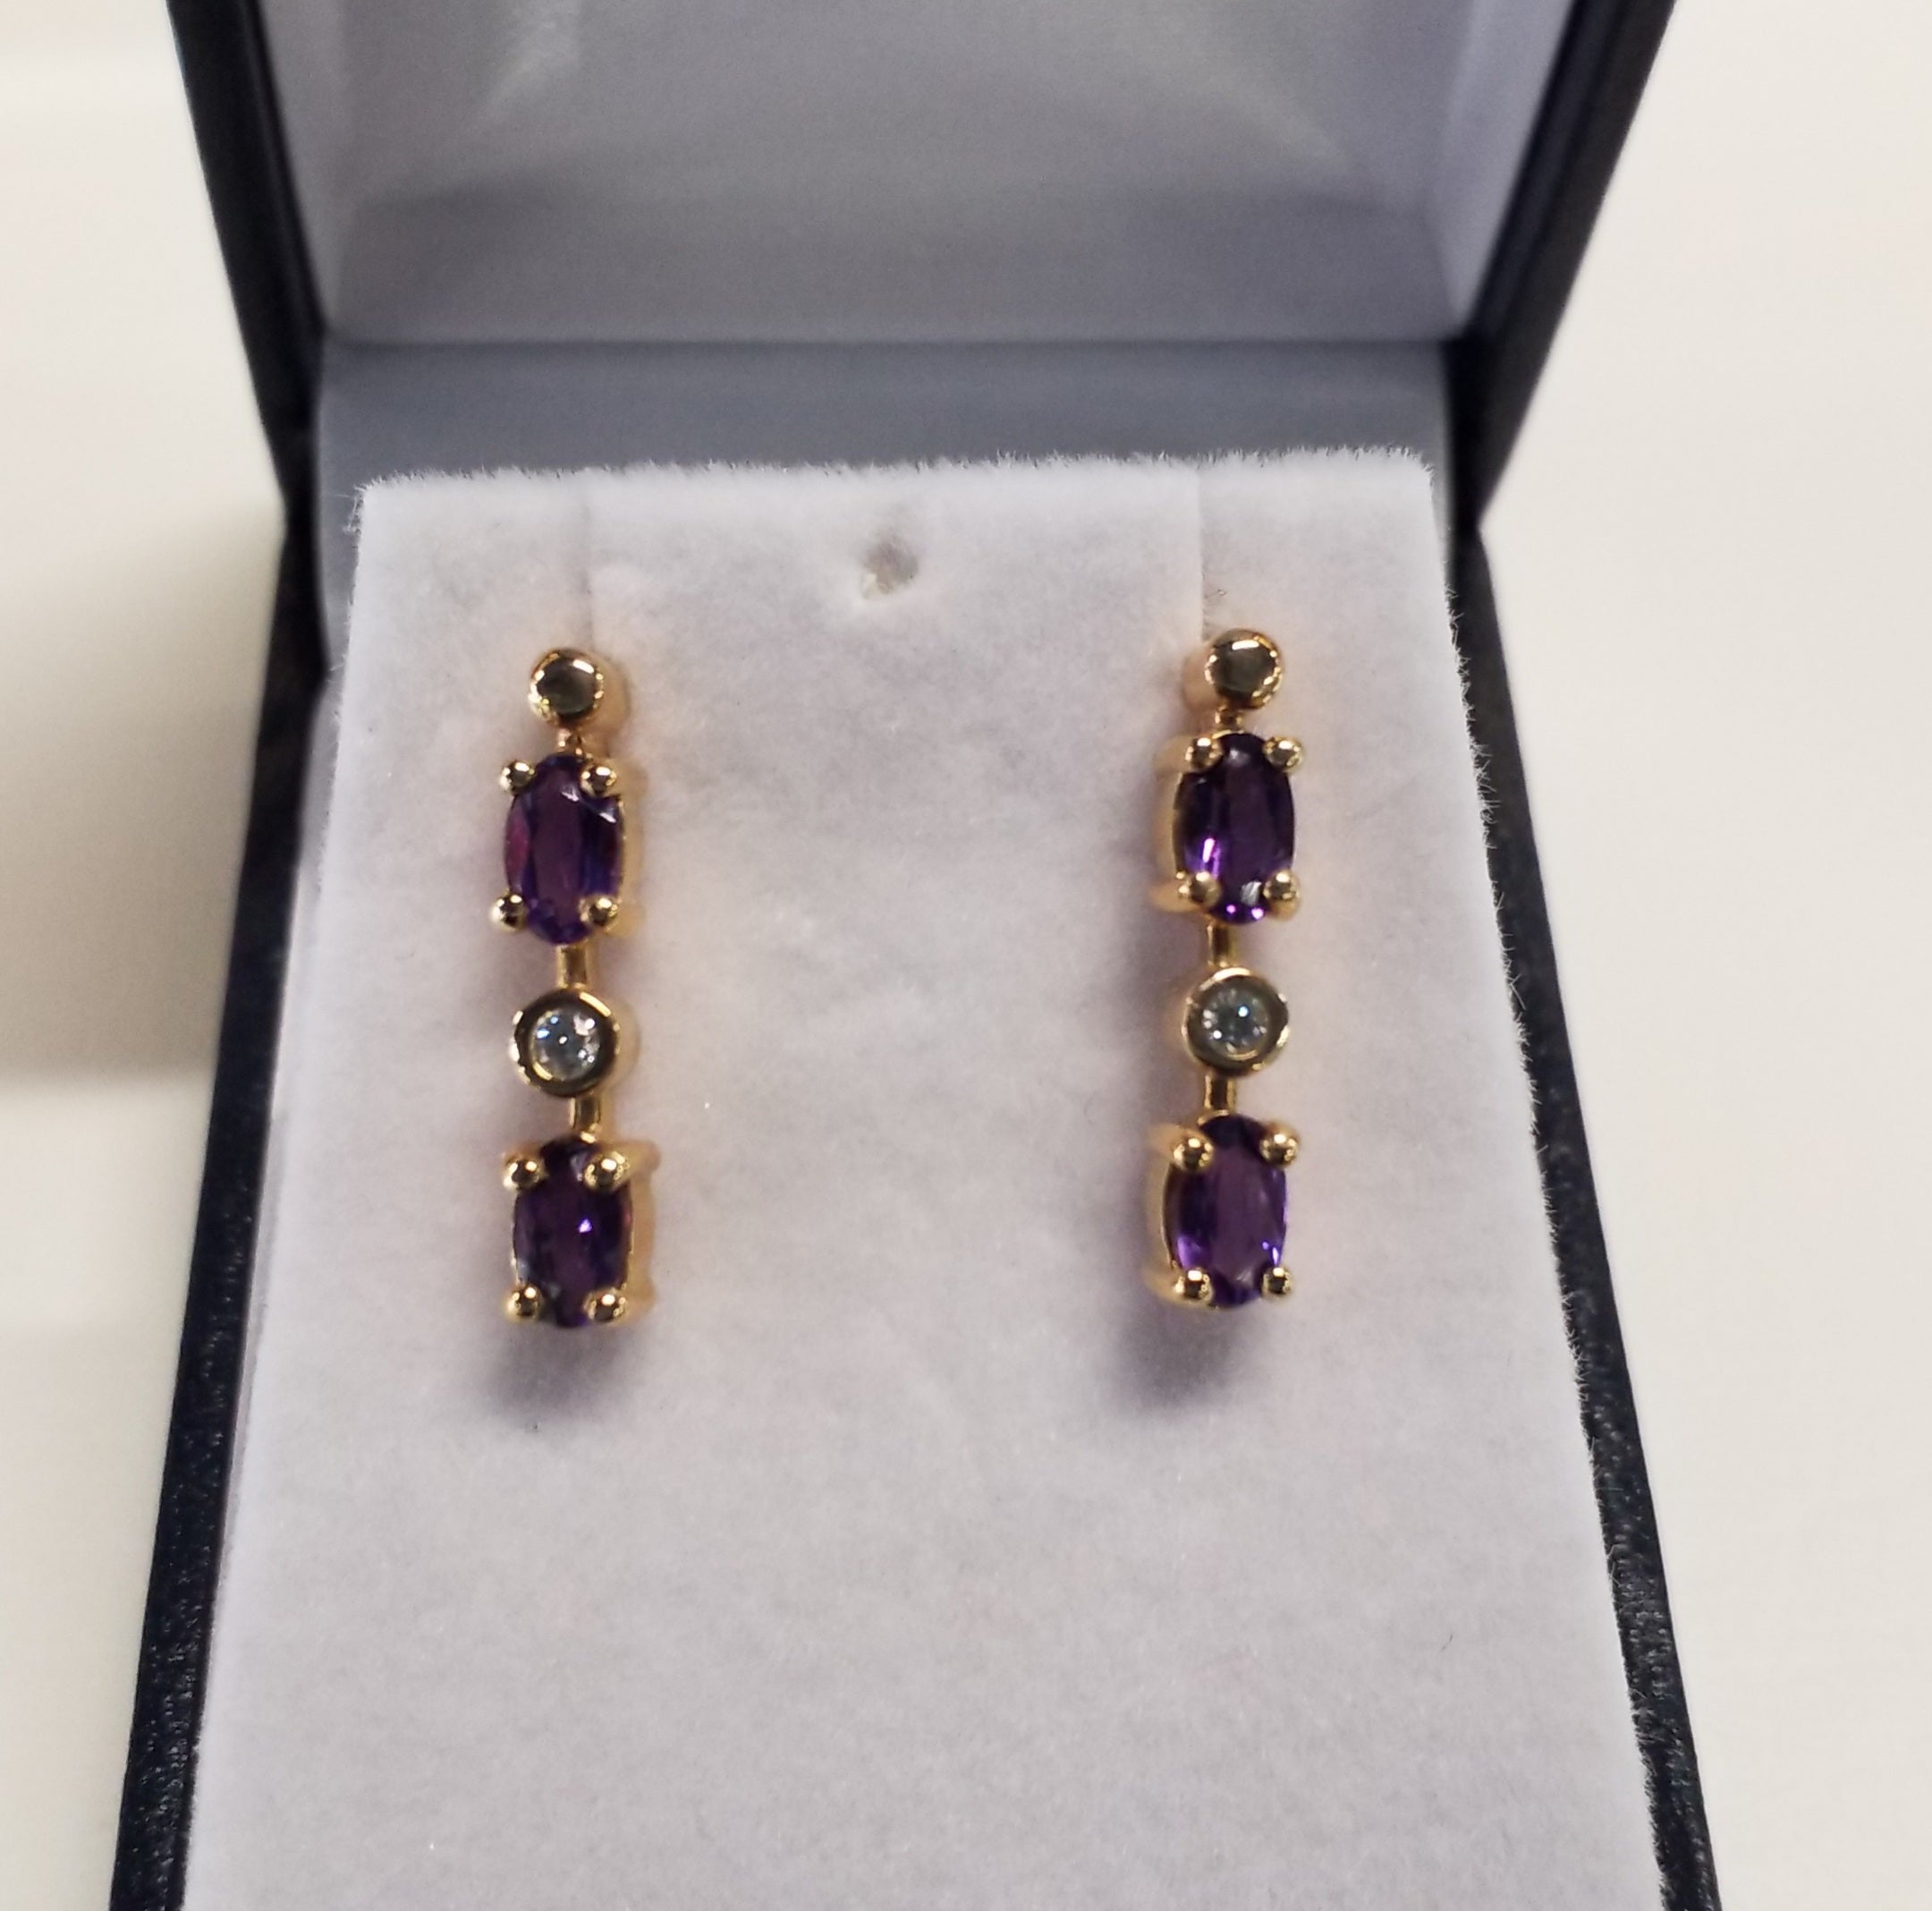 Oval Cut Amethysts Earrings with Diamonds - Matching Pendant also available